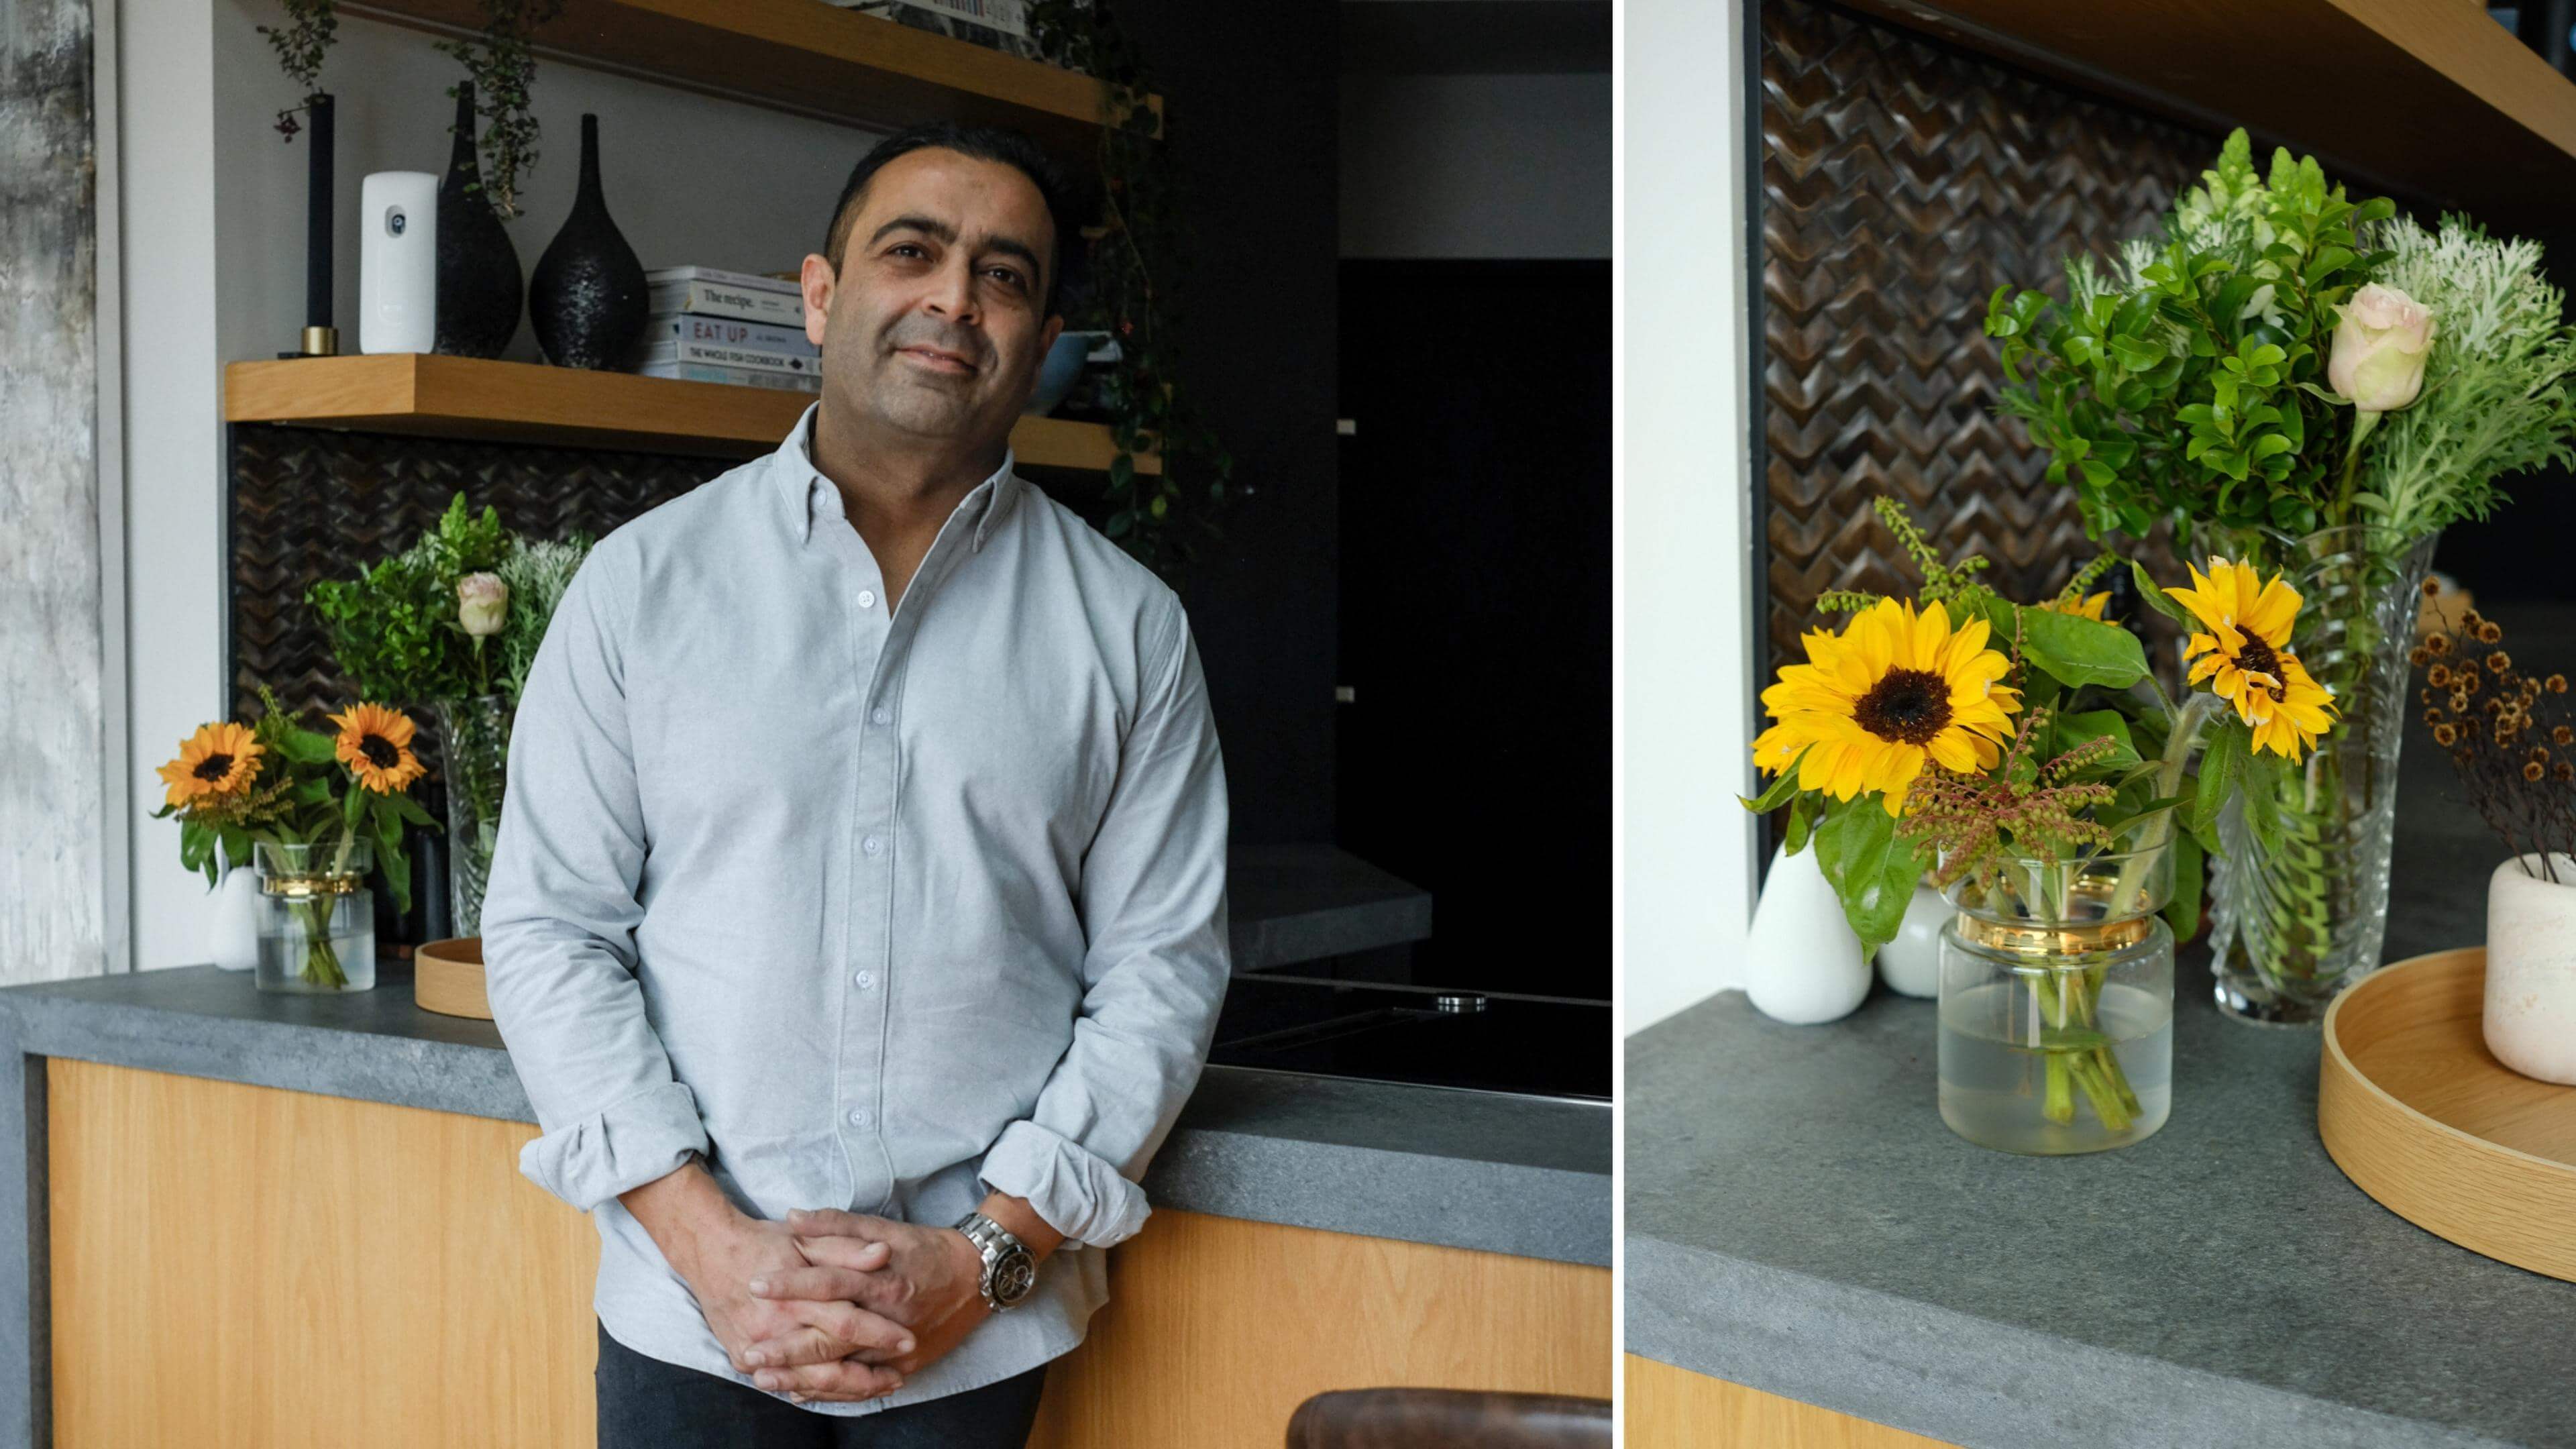 Sid Sahrawat Chef standing in front of his kitchen next to an image of some flowers on the countertop